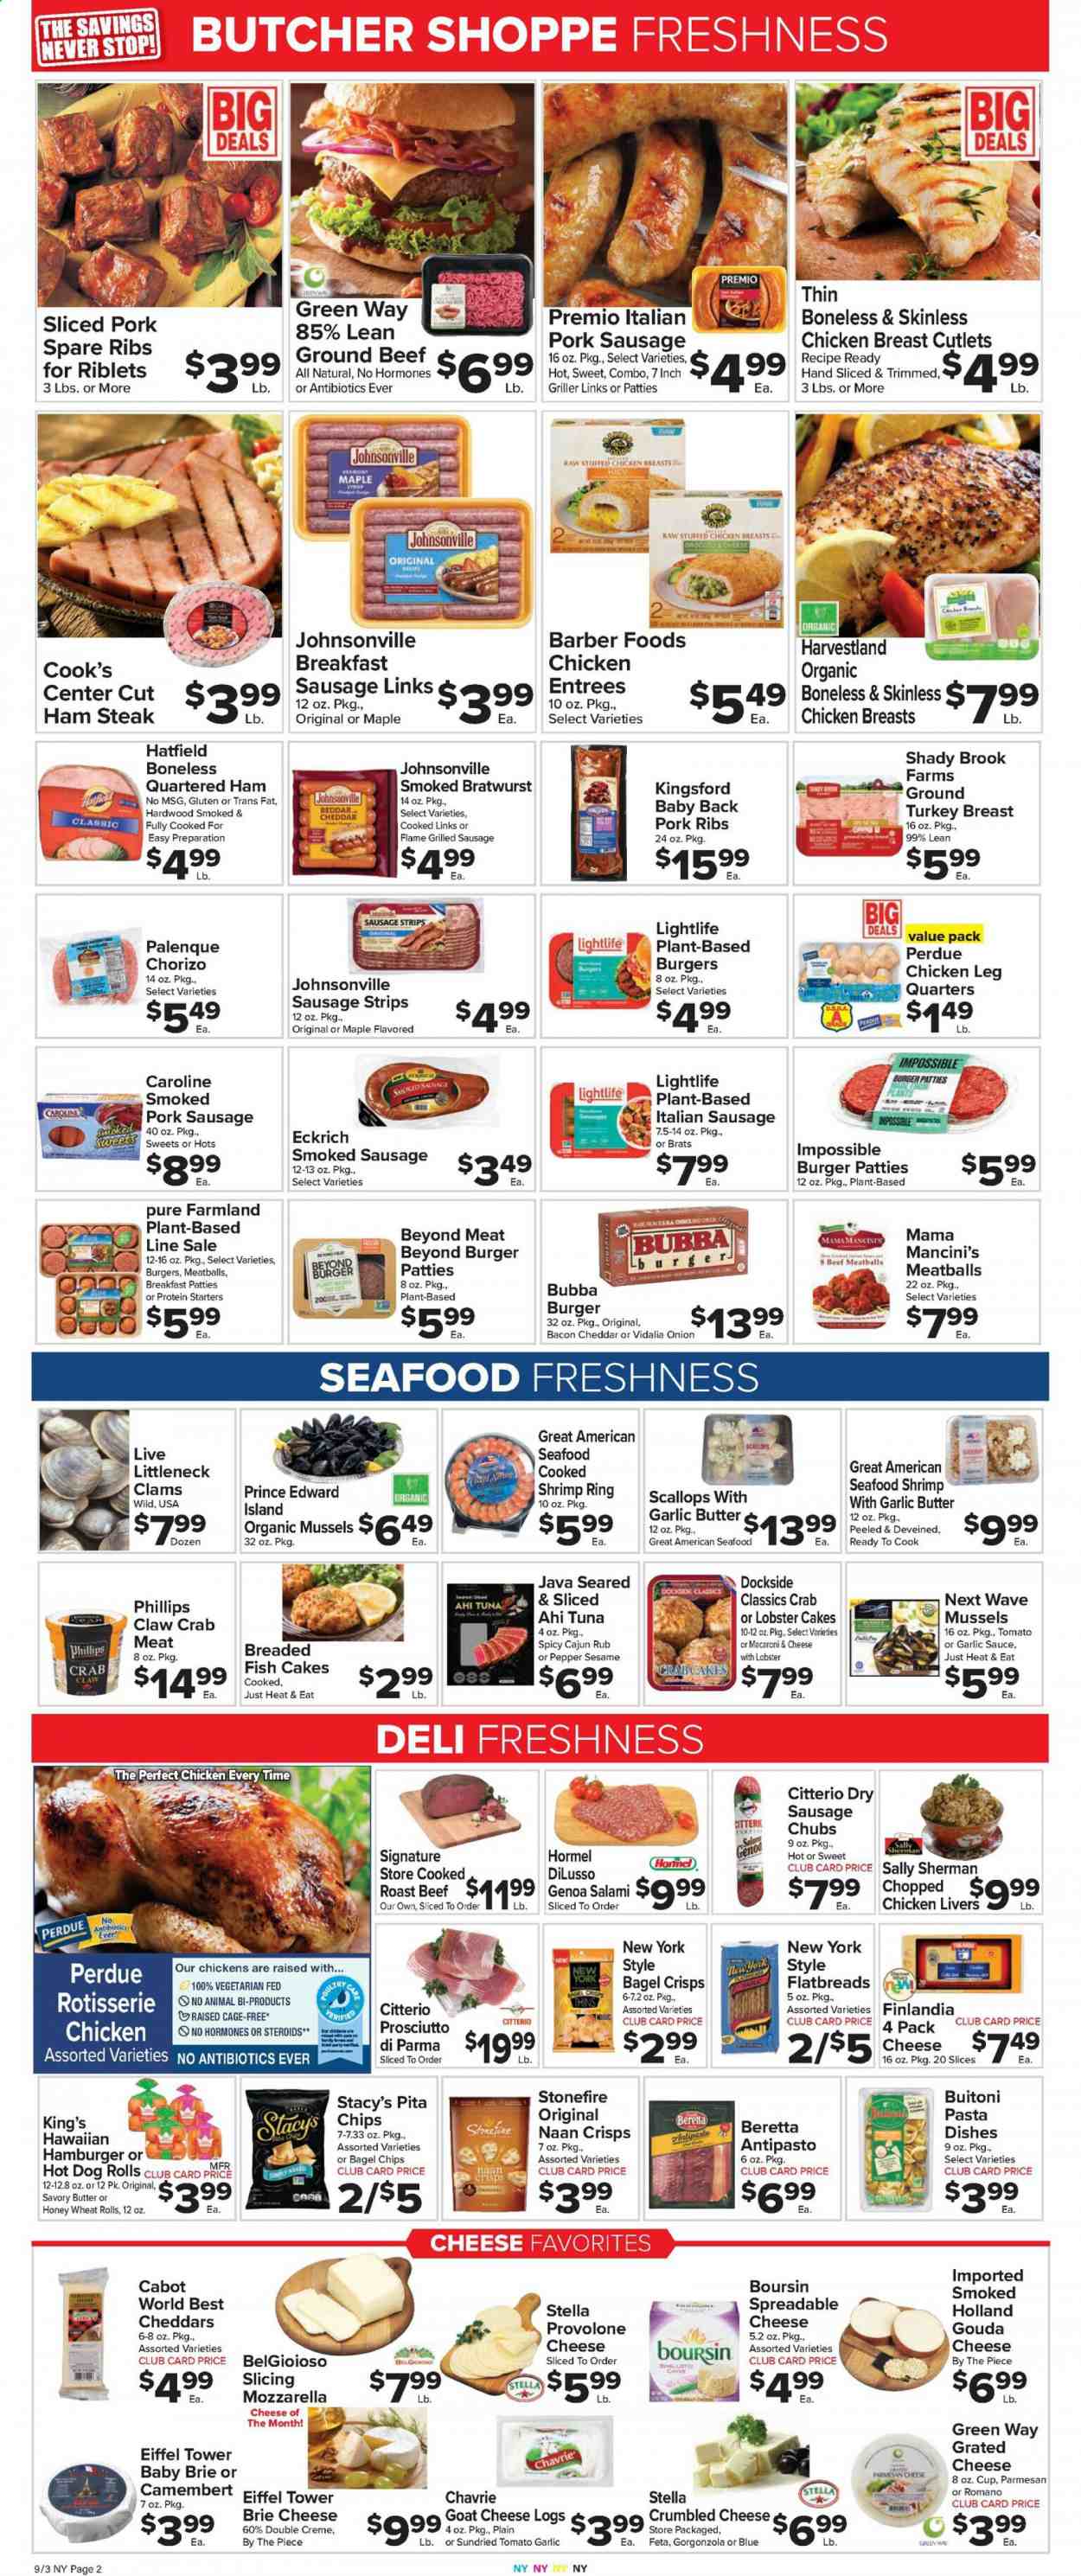 thumbnail - Foodtown Flyer - 09/03/2021 - 09/09/2021 - Sales products - hot dog rolls, onion, clams, crab meat, lobster, mussels, scallops, tuna, seafood, crab, fish, shrimps, lobster cakes, macaroni & cheese, meatballs, hamburger, pasta, Perdue®, breaded fish, pasta sides, Hormel, stuffed chicken, Buitoni, bacon, salami, ham, prosciutto, chorizo, Johnsonville, Cook's, bratwurst, sausage, smoked sausage, pork sausage, italian sausage, ham steaks, camembert, goat cheese, gouda, parmesan, brie, gorgonzola, grated cheese, feta, Provolone, cage free eggs, butter, strips, fish cake, chips, Thins, bagel crisps, garlic sauce, Ron Pelicano, turkey breast, chicken legs, chicken livers, beef meat, ground beef, steak, burger patties, pork meat, pork ribs, pork spare ribs, pork back ribs, WAVE, Sharp. Page 4.